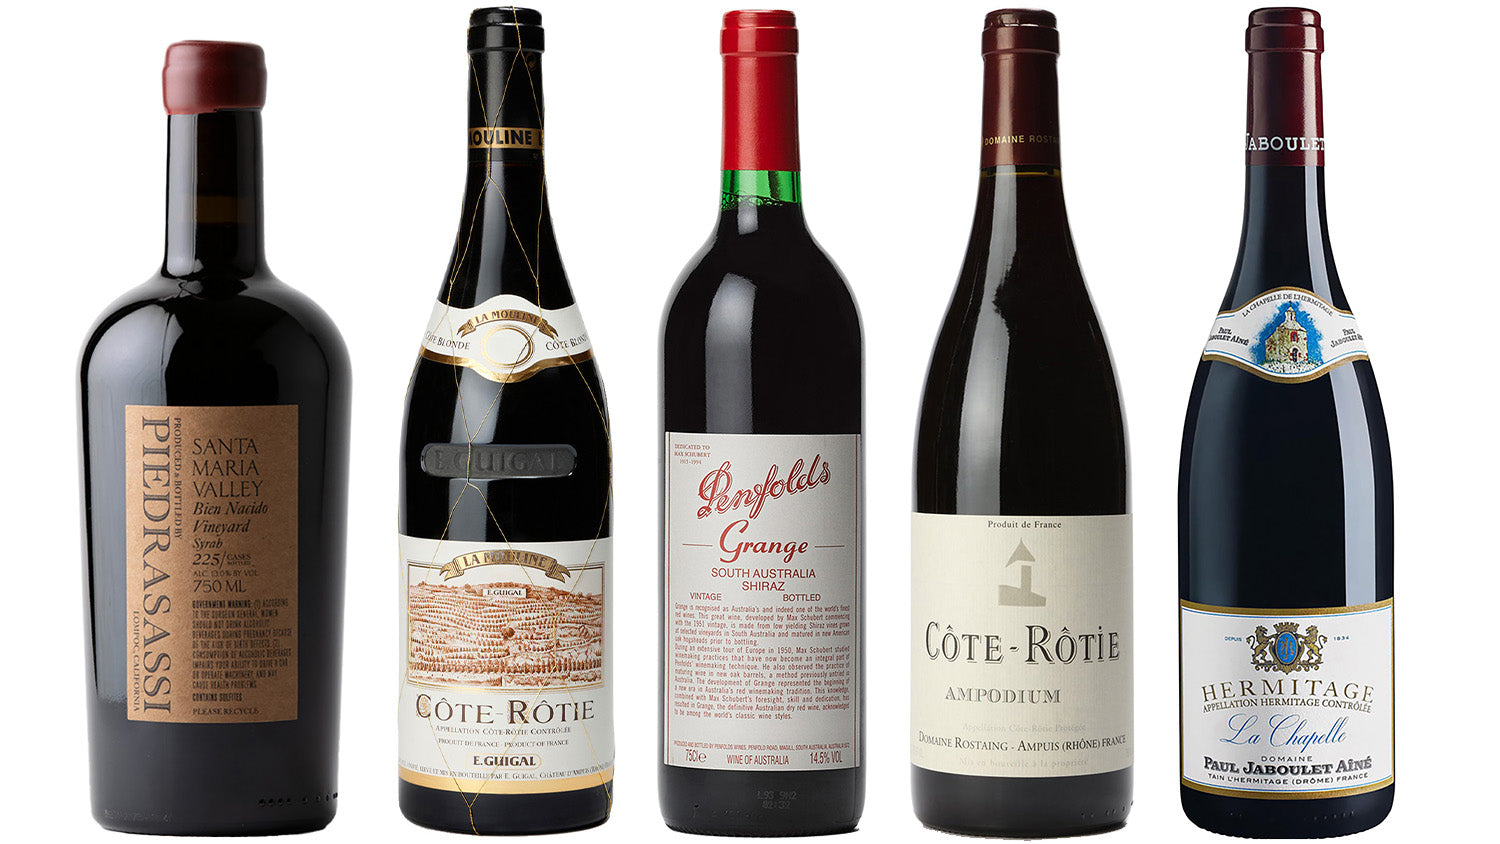 Expressions of Syrah: Old World and New